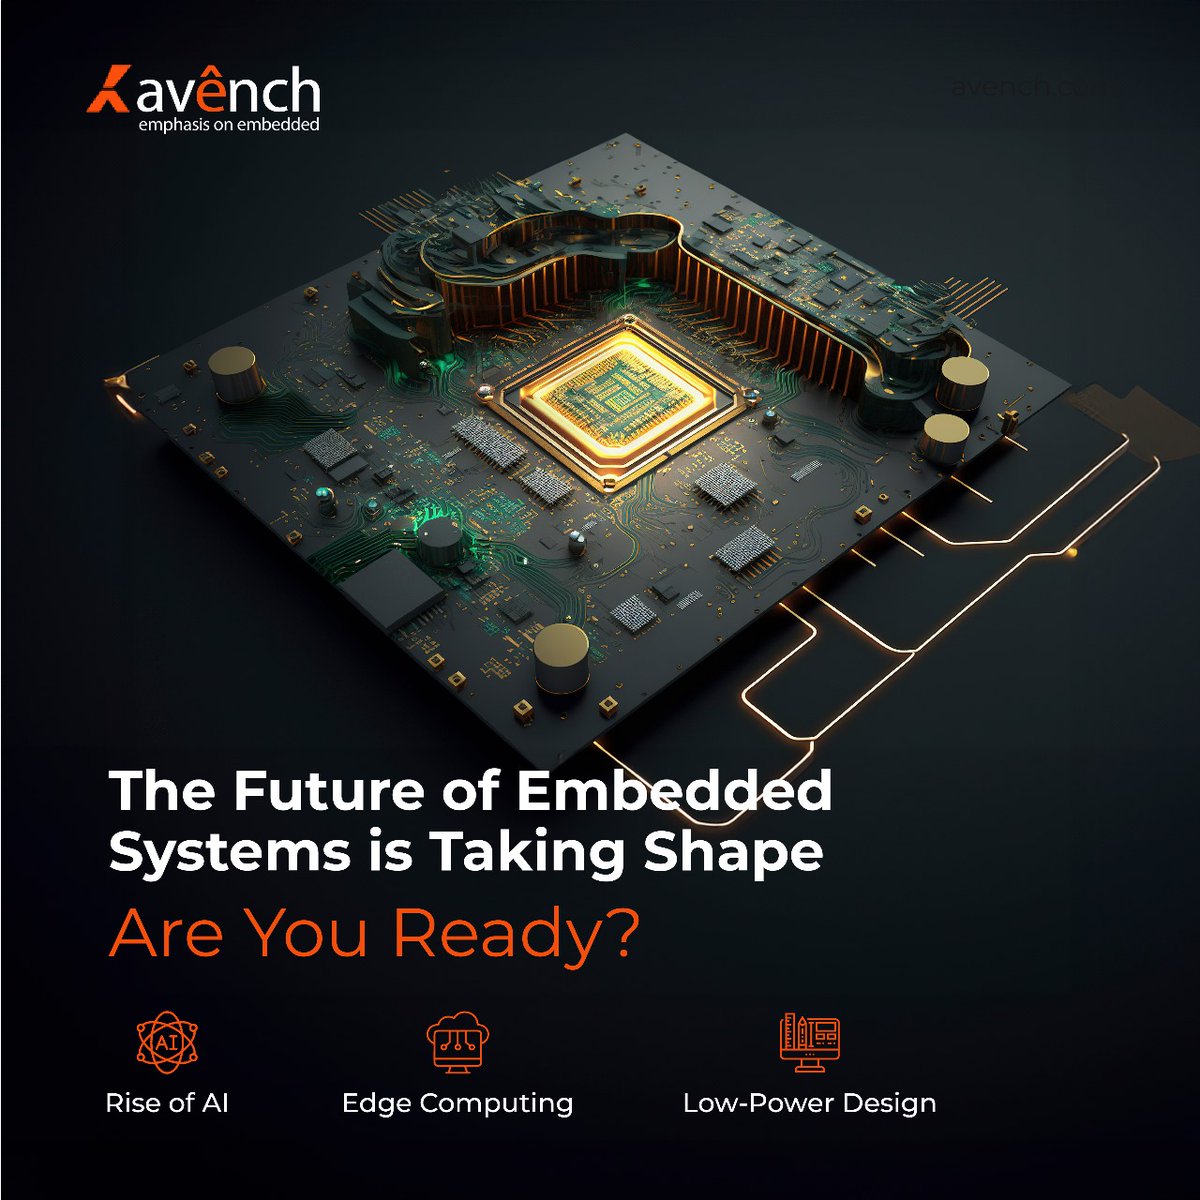 Boost your industry operations with Avench's advanced embedded system designs for maximum reliability and efficiency. We are your innovation partner, transforming ideas into reality. Contact us today! avench.com #avenchsystem #embeddedsystems #IOTsystem